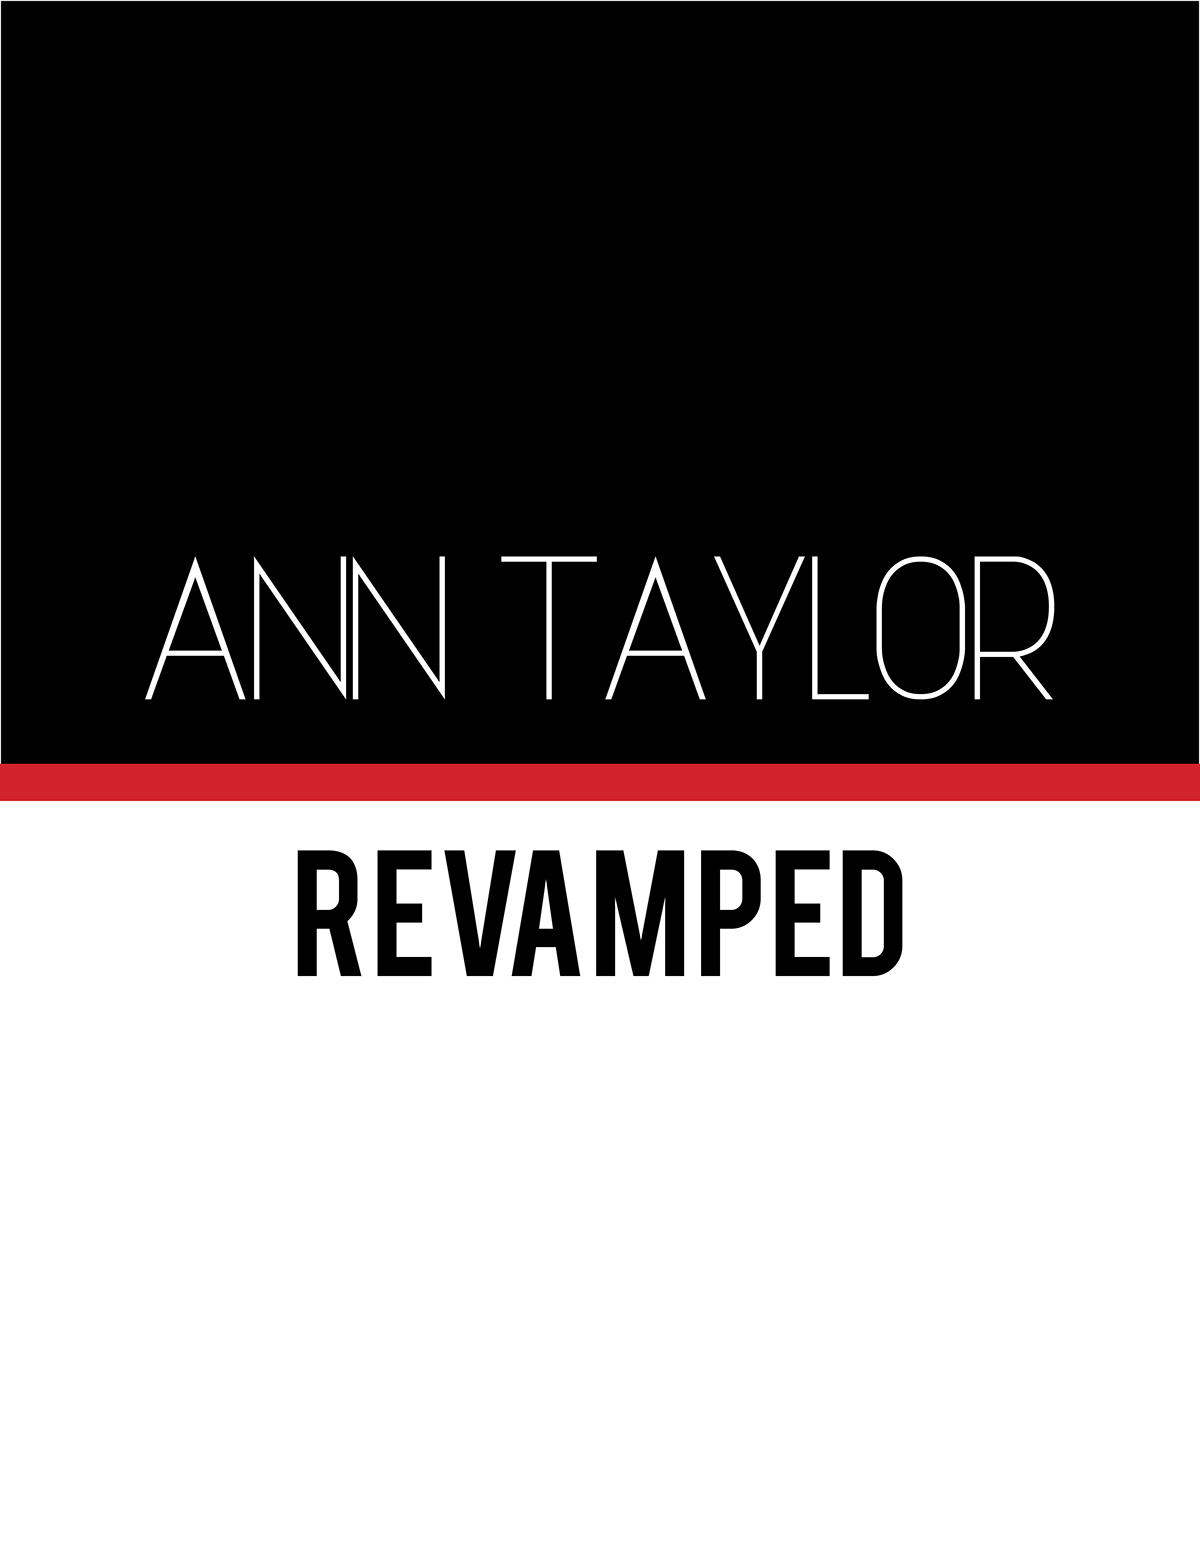 ann taylor styling  advertisement mock up campaign relaunch revamped bold